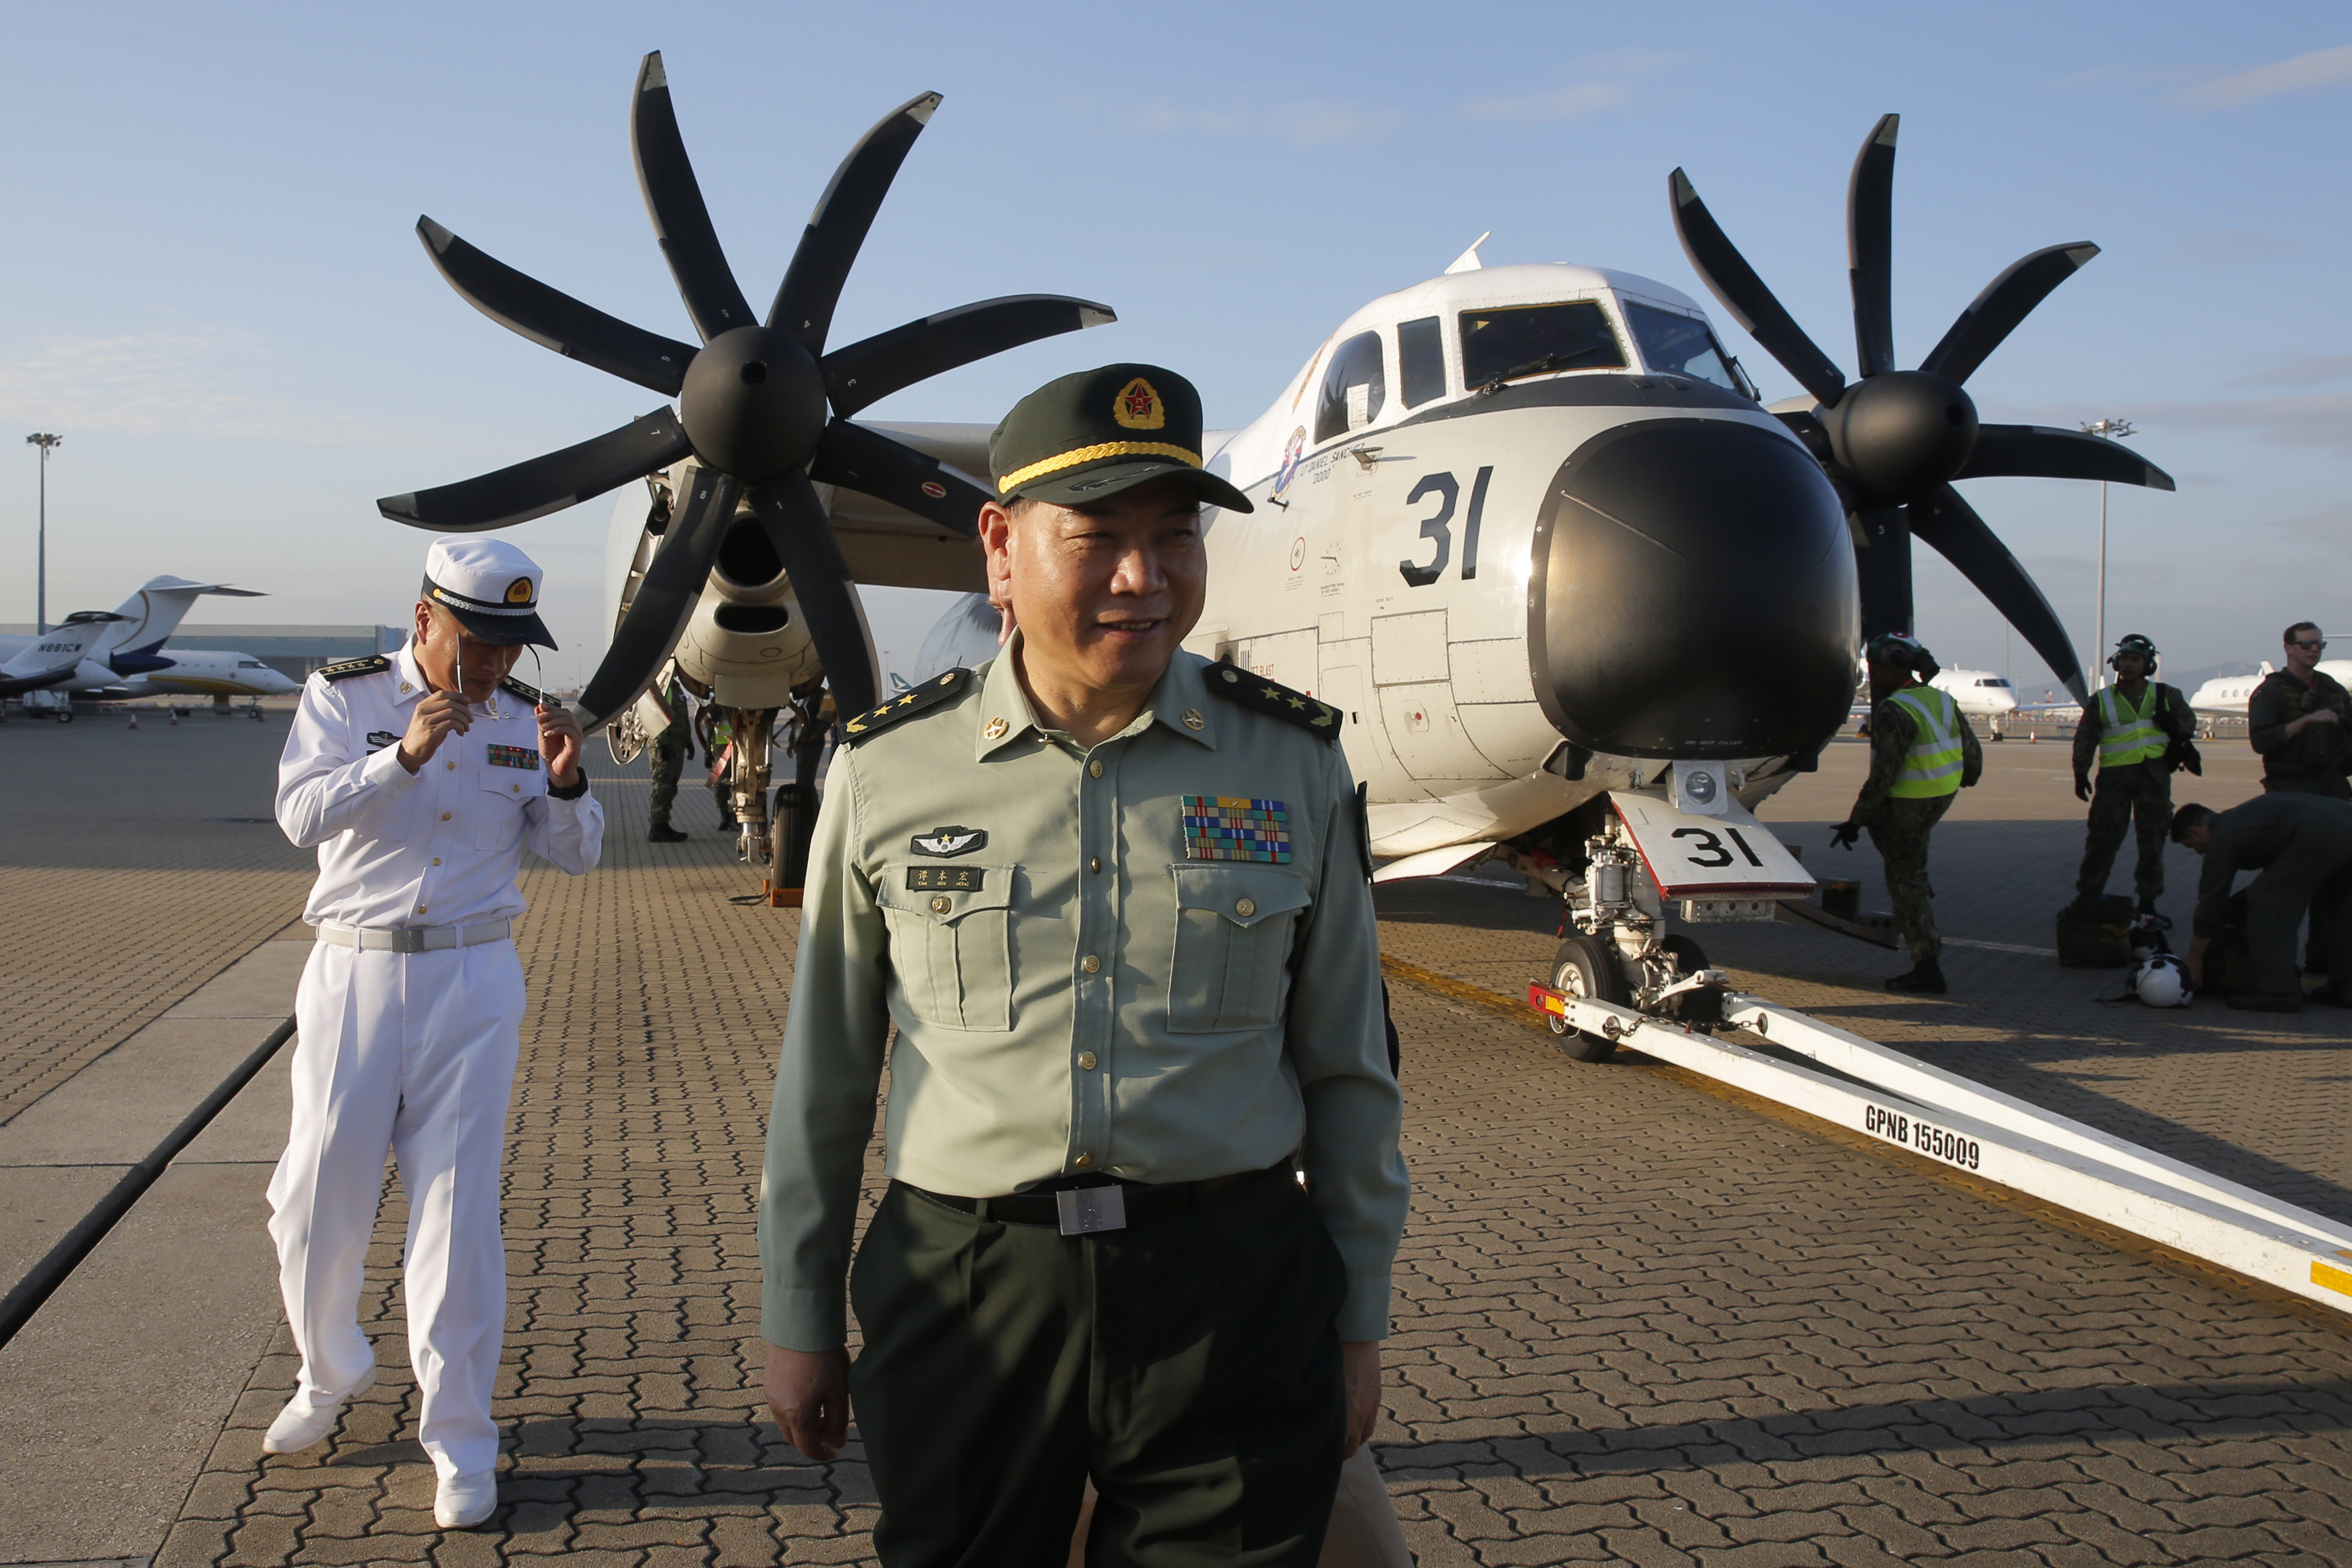 Tan Benhong, a lieutenant general of the People's Liberation Army (PLA) of China, arrives Hong Kong airport after visiting the U.S. Navy USS Ronald Reagan, in Hong Kong, Tuesday, Nov. 20, 2018. China is allowing the USS Reagan and its battle group to make a port call in Hong Kong after it earlier turned down a similar request amid tensions with Washington. (AP Photo/Kin Cheung)